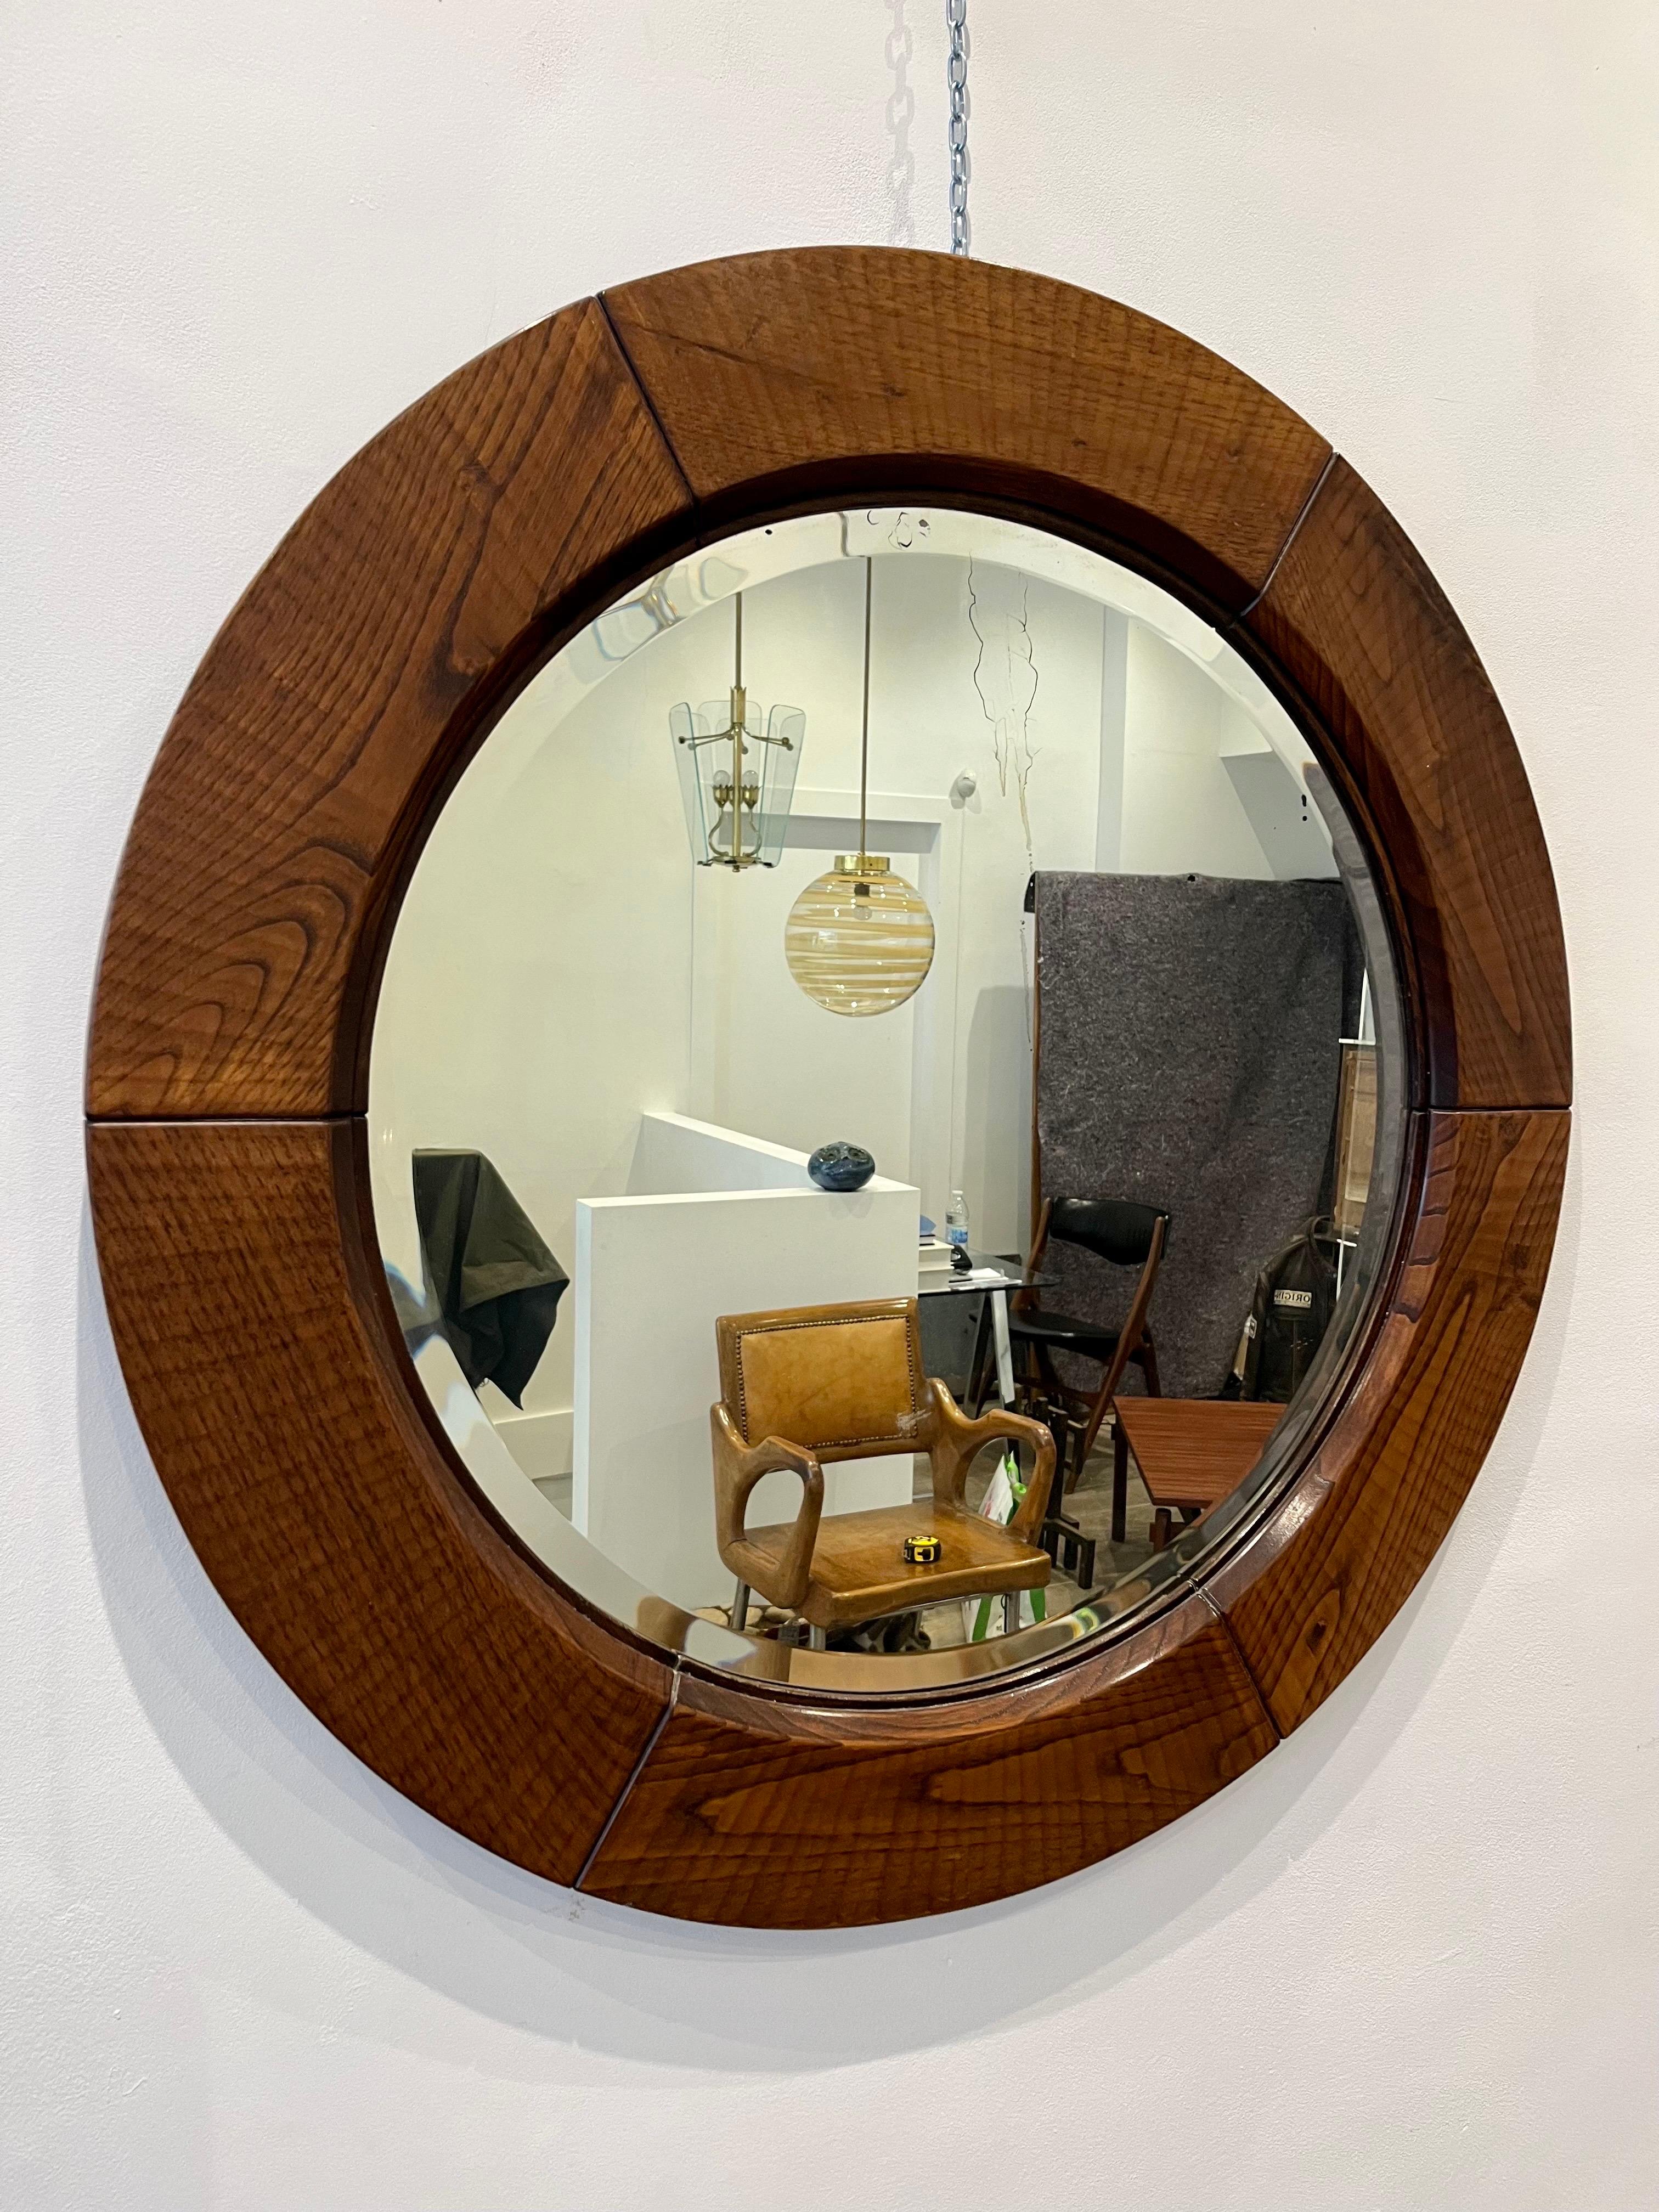 Giuseppe Rivadossi is a designer and cabinet maker still active in Brescia. His company, Officina Rivadossi, still creates design by his hand. All his designs are his own creations. The present mirror was created in the late 1970s early 80s. It is